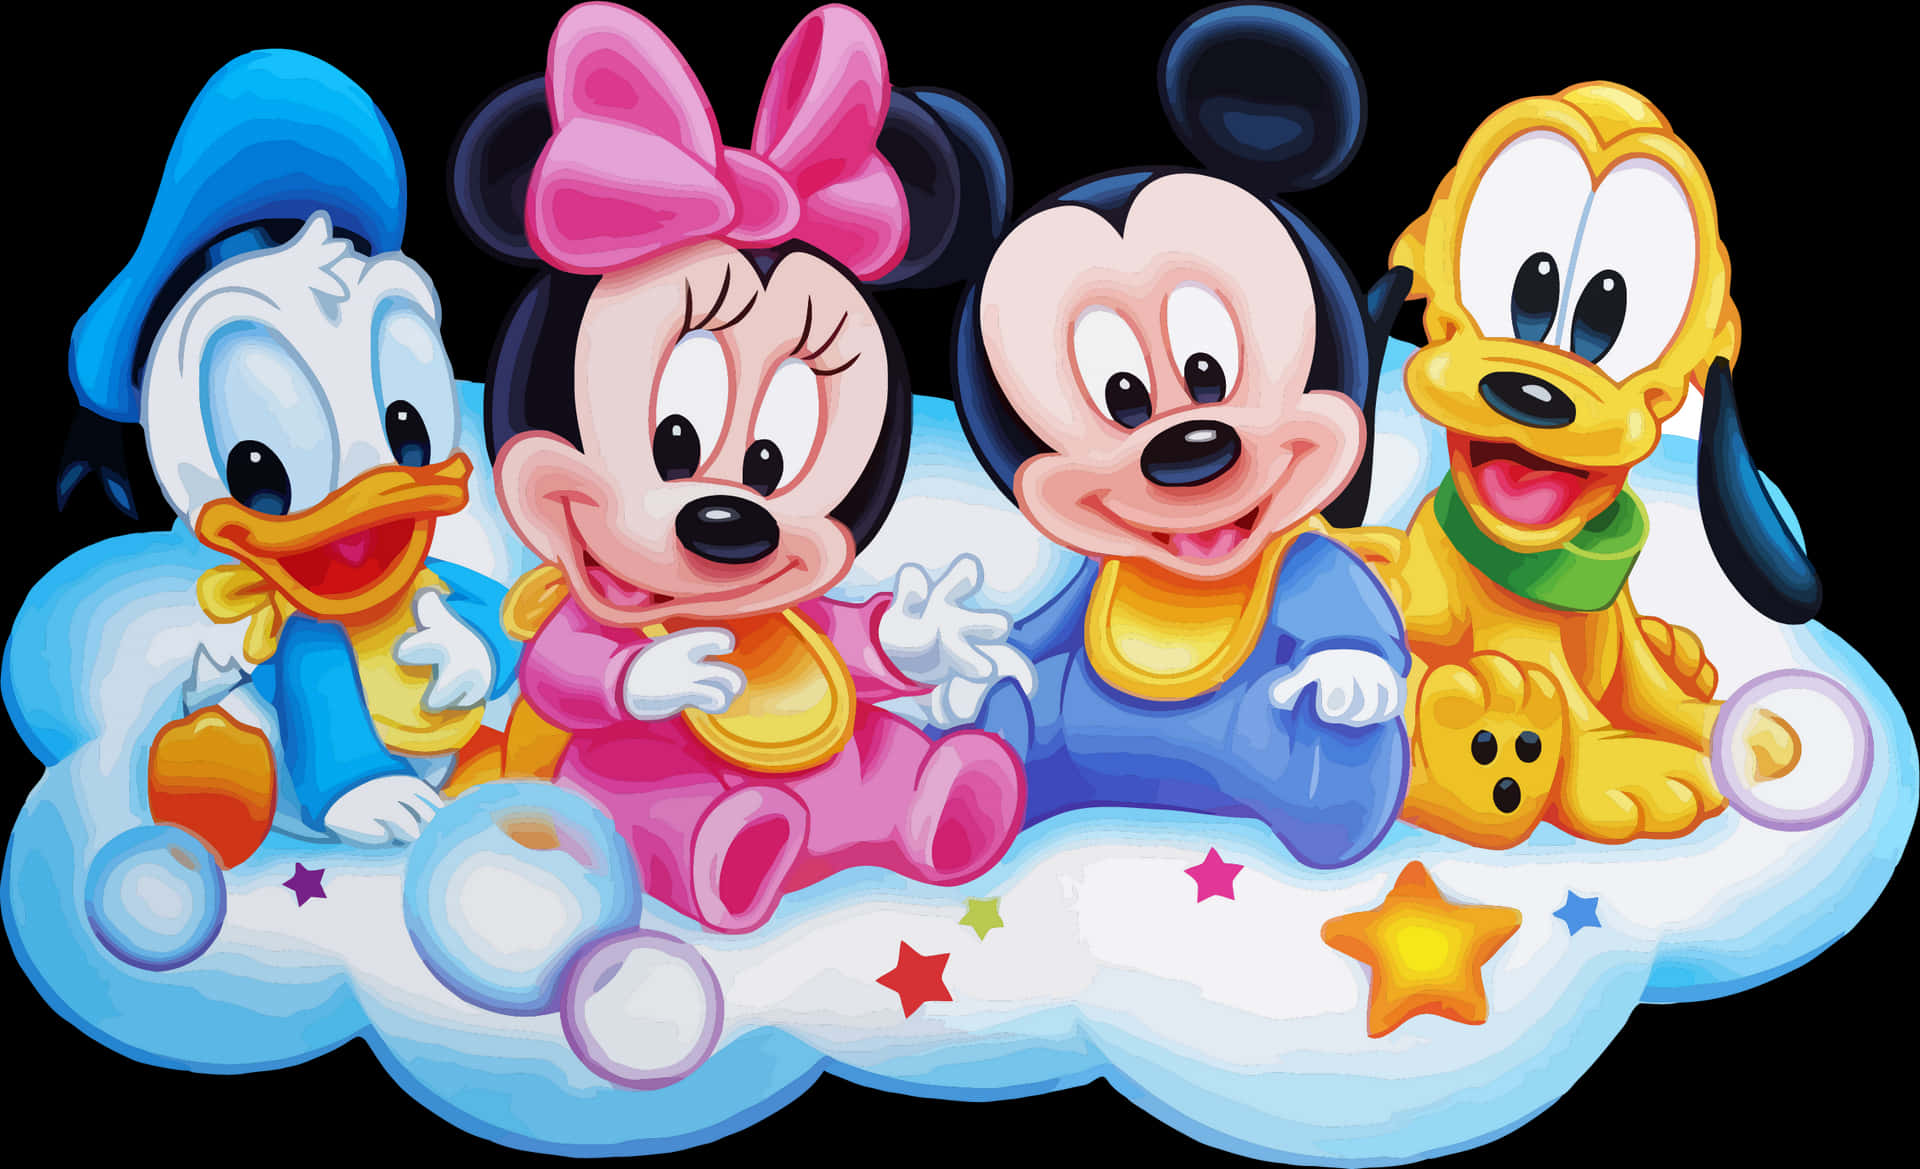 Disney Classic Characters On Cloud PNG image